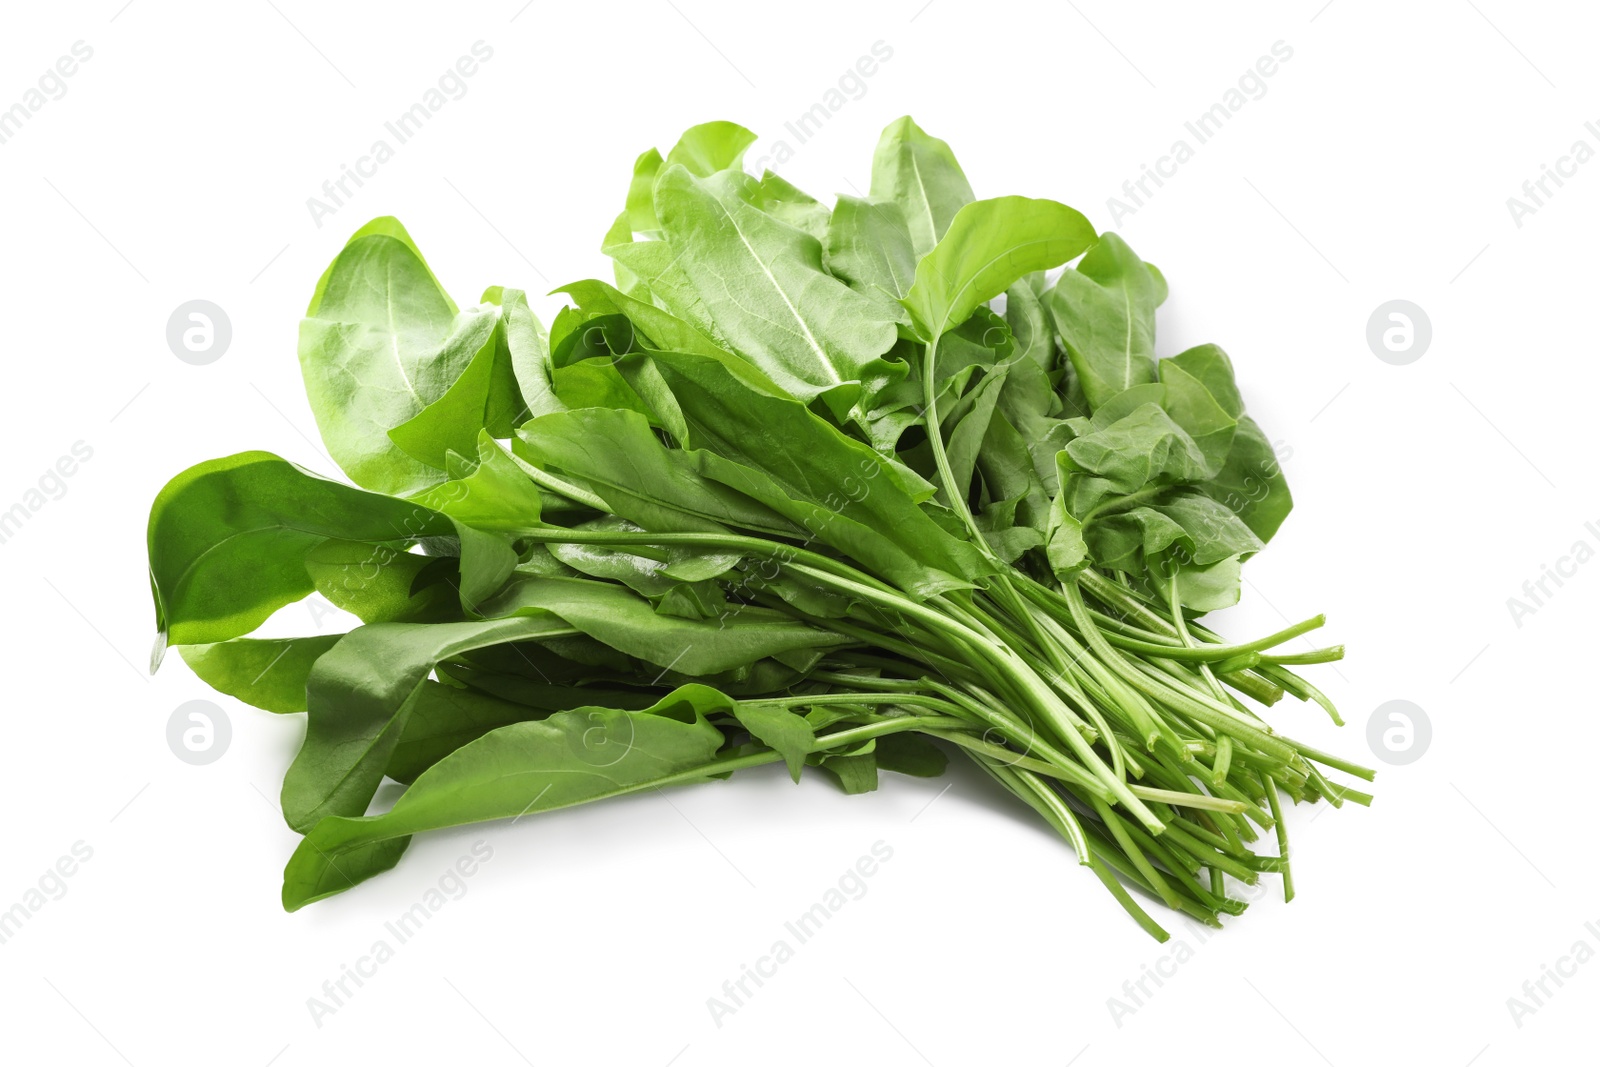 Photo of Bunch of fresh green sorrel leaves on white background